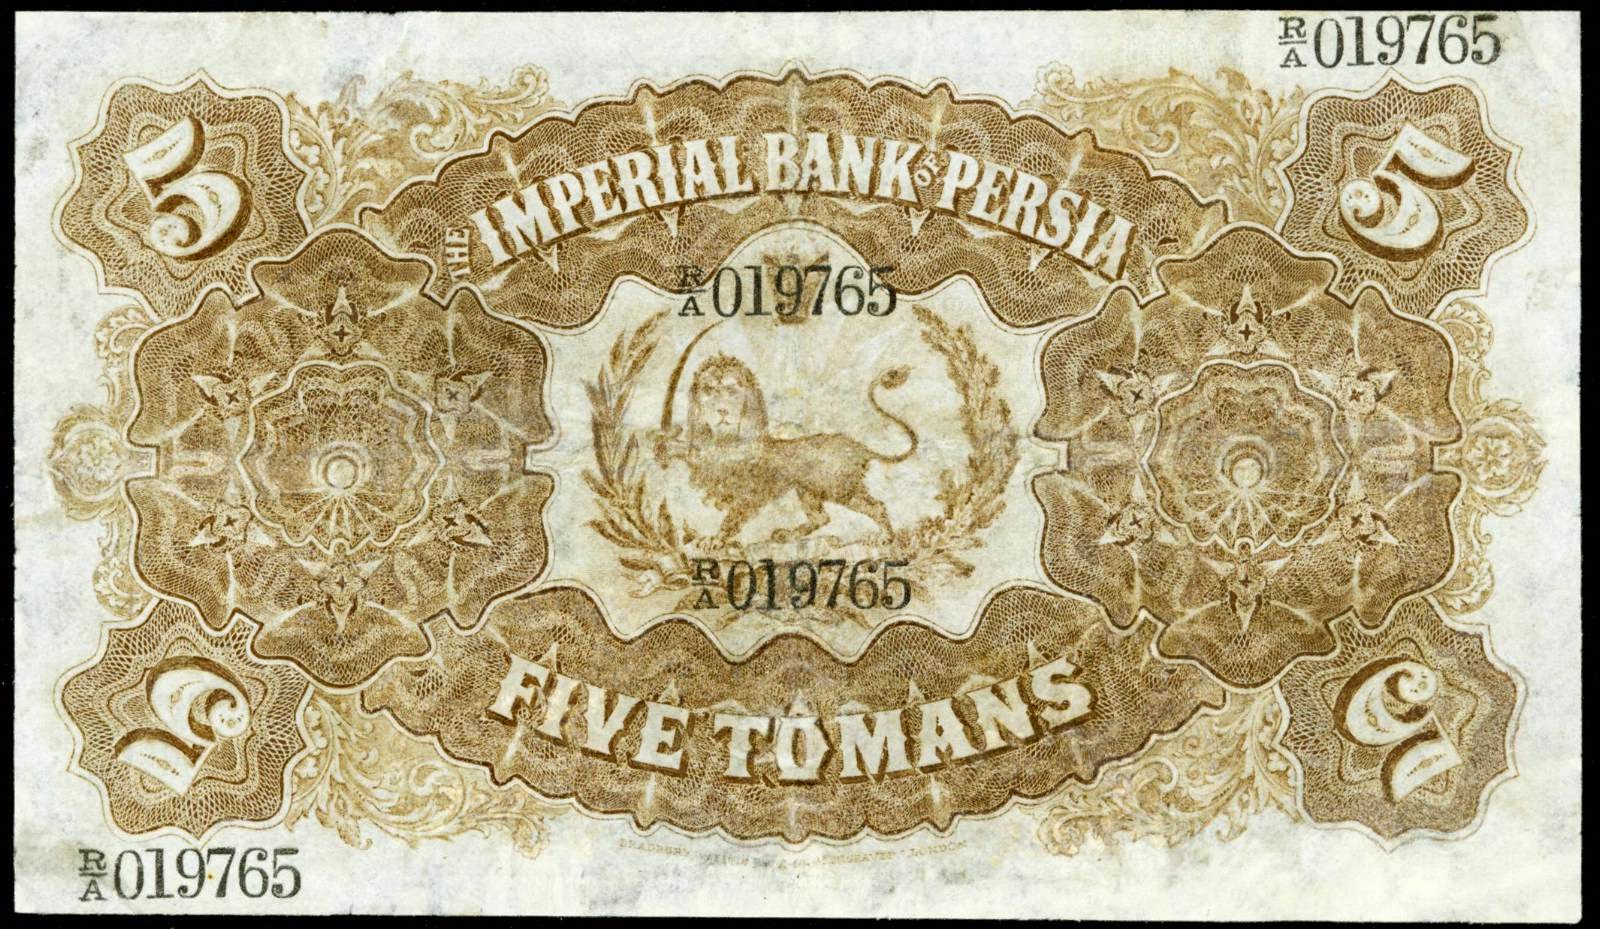 Iran paper money 5 Tomans banknote 28 November 1910 Imperial bank of Persia